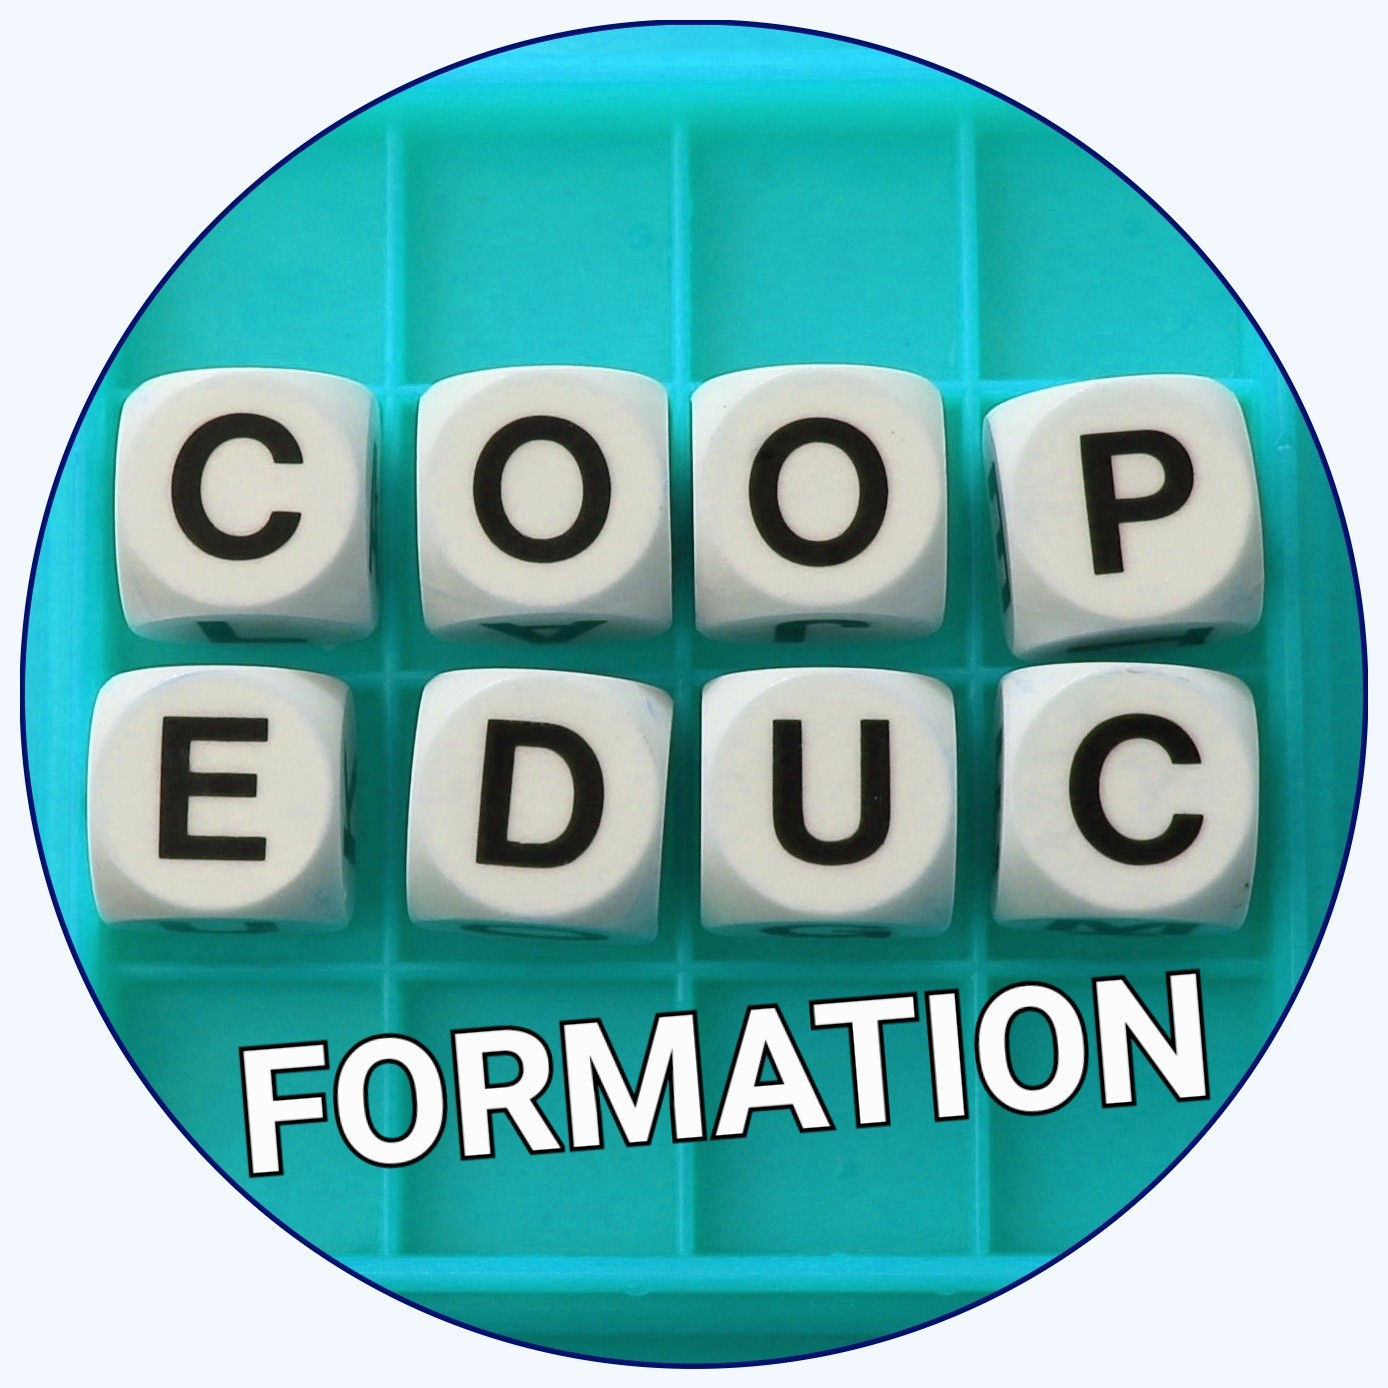 Coop Educ Formation